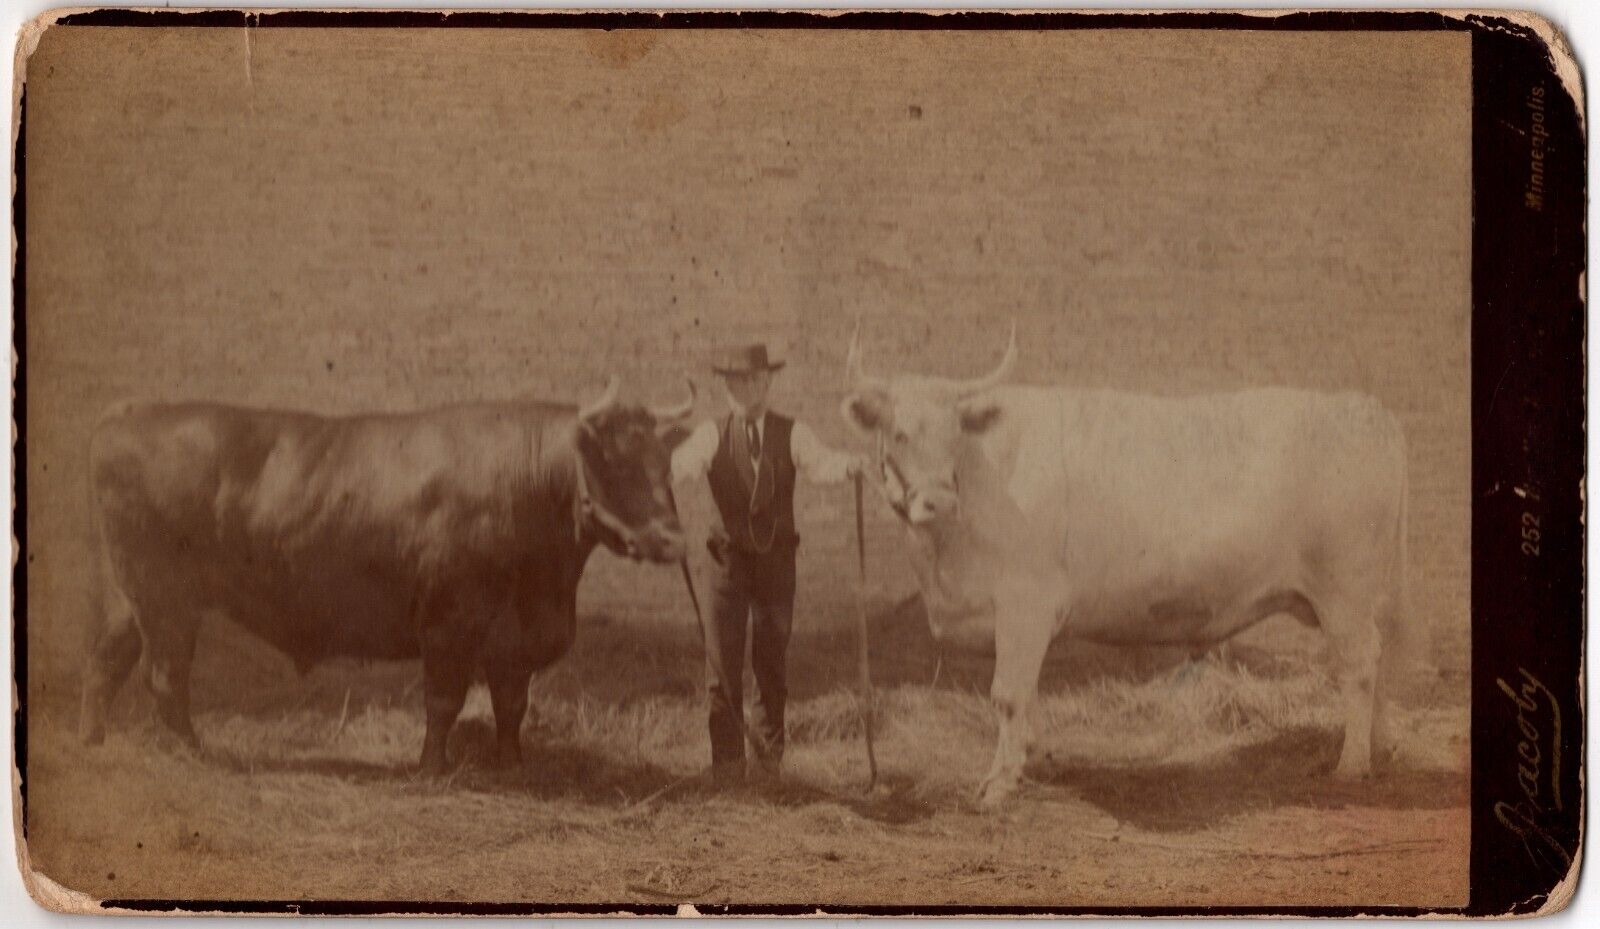 C. 1880s CABINET CARD JACOBY OLD BEARDED MAN HOLDING TWO BULLS MINNEAPOLIS MINN.